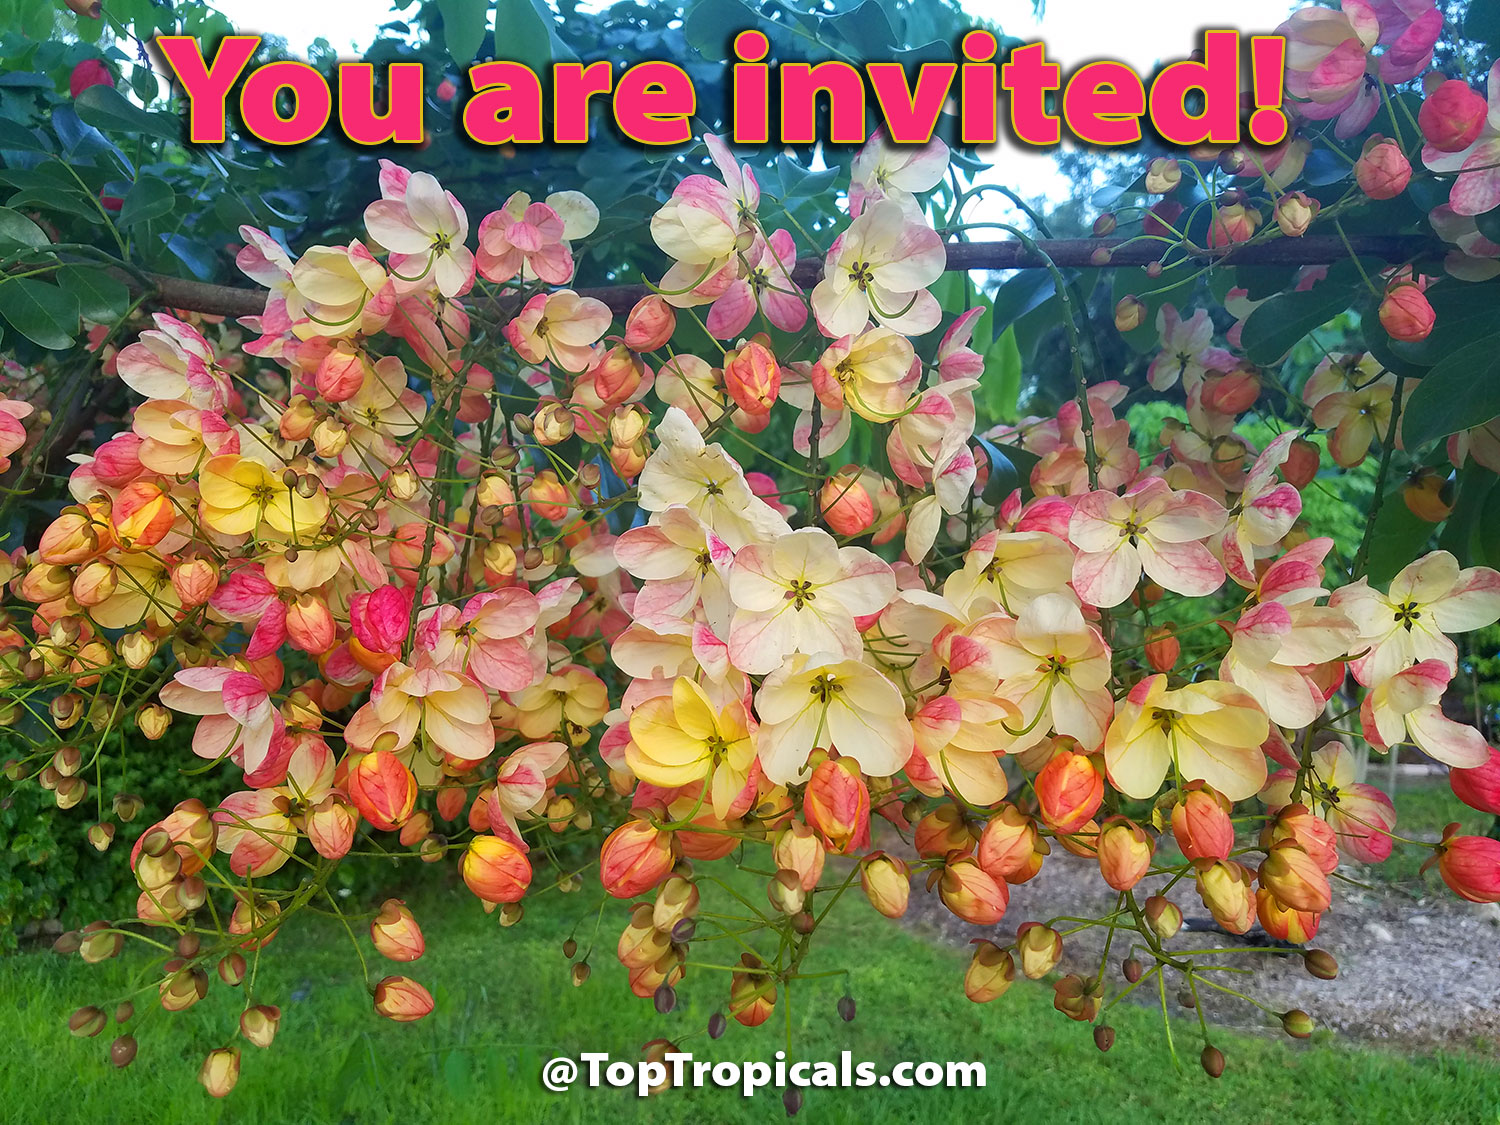 You are invited to Kristi's Birthday Bash and Plant Market at Top Tropicals